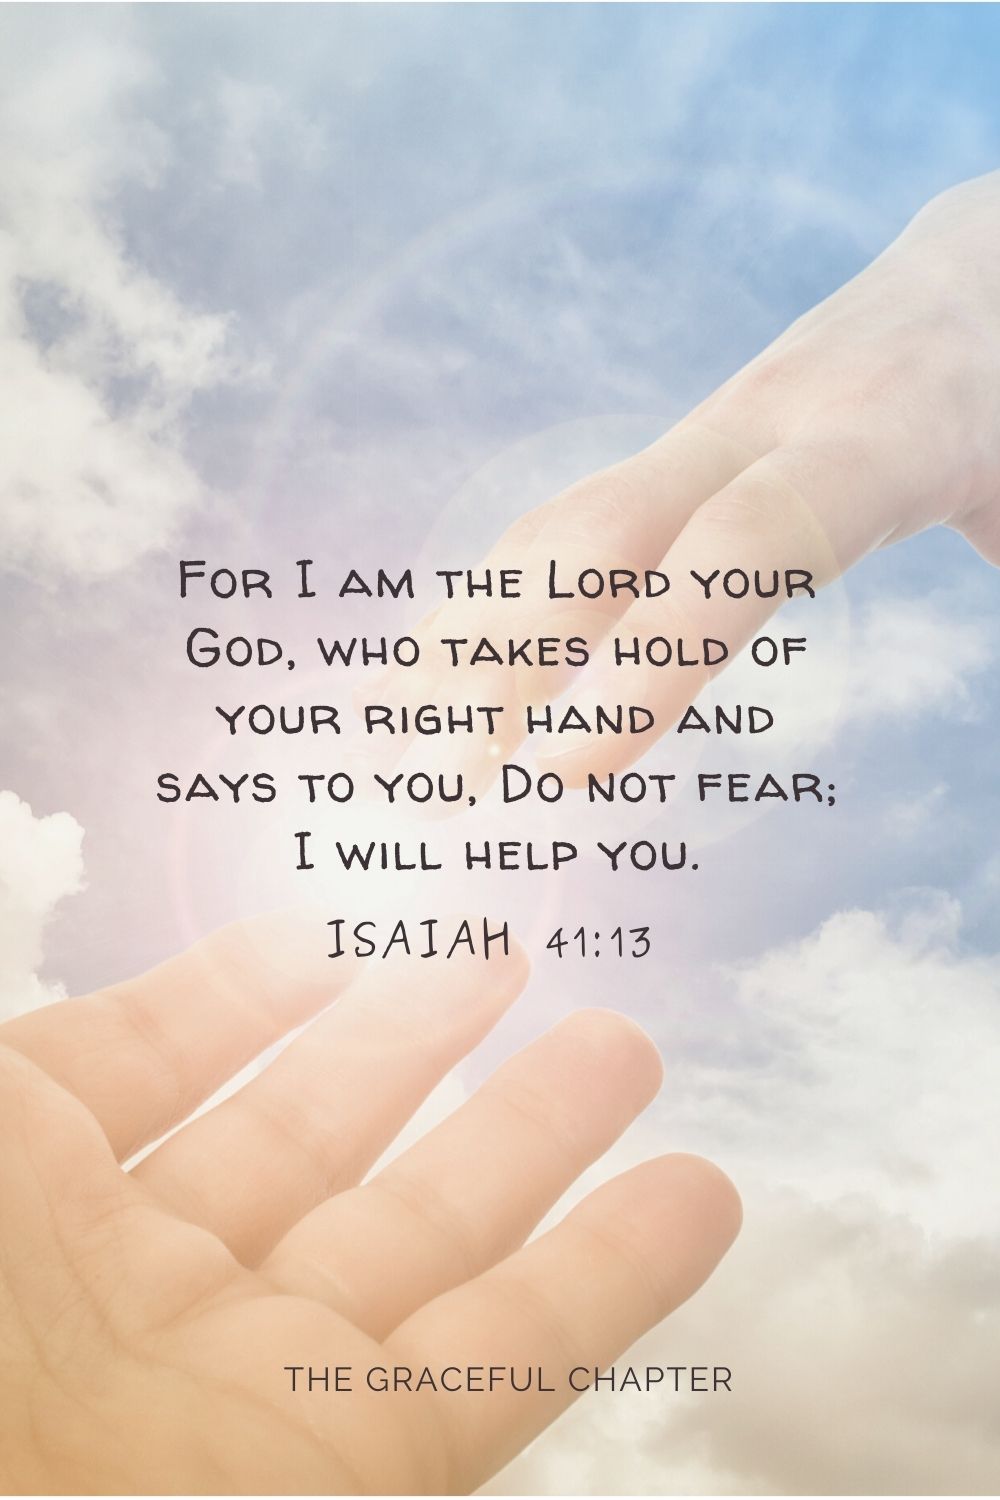 For I am the Lord your God who takes hold of your right hand and says to you, Do not fear; I will help you. Isaiah 41:13